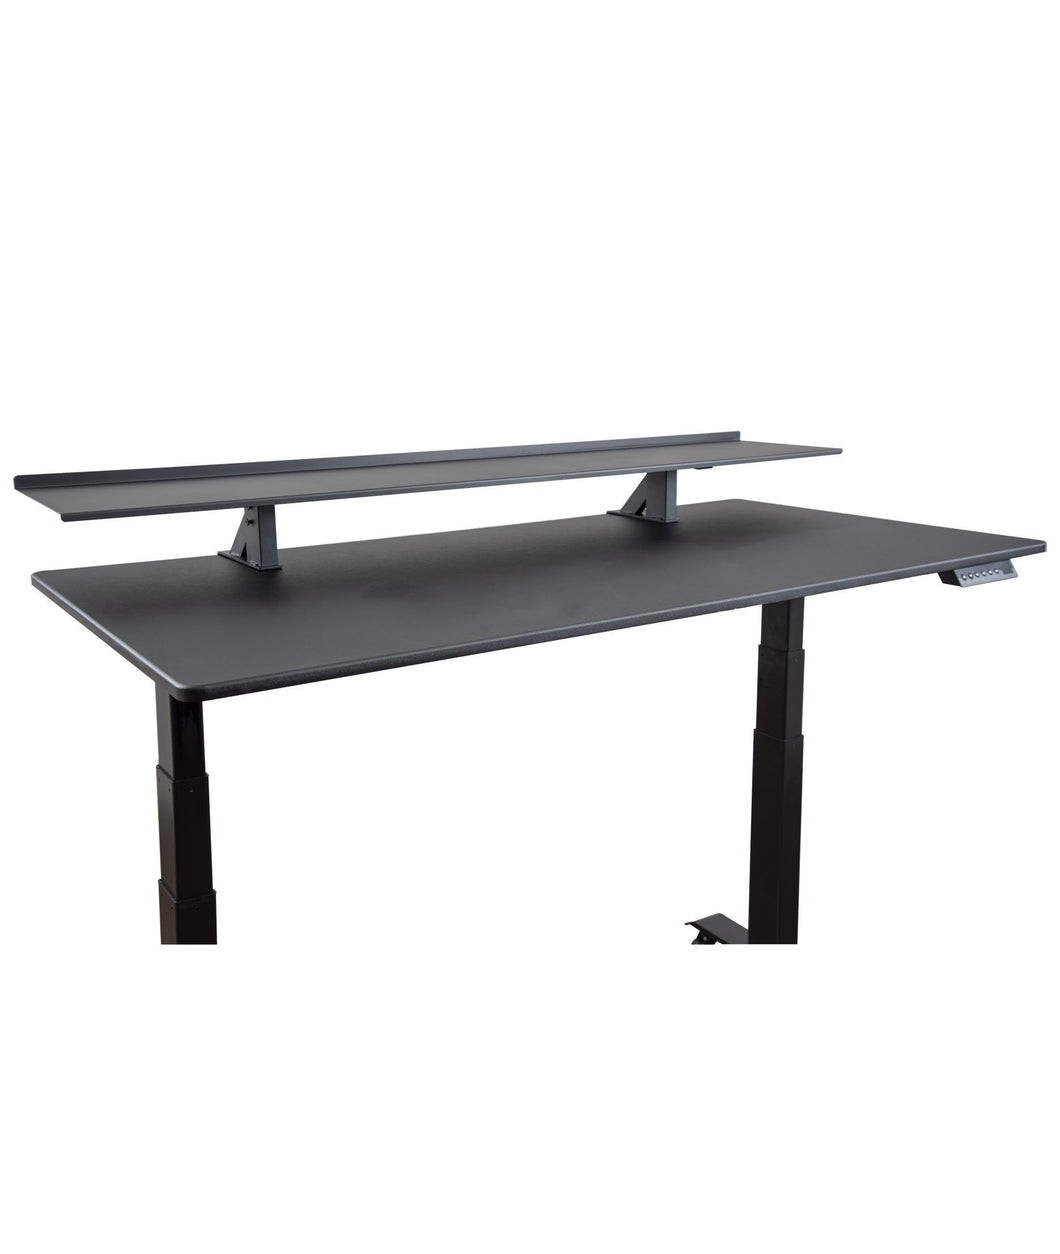 Top stand up desk store 60 clamp on desk shelf monitor stand with adjustable height reduces clutter on your standing desk while placing your monitors at a comfortable height black 60